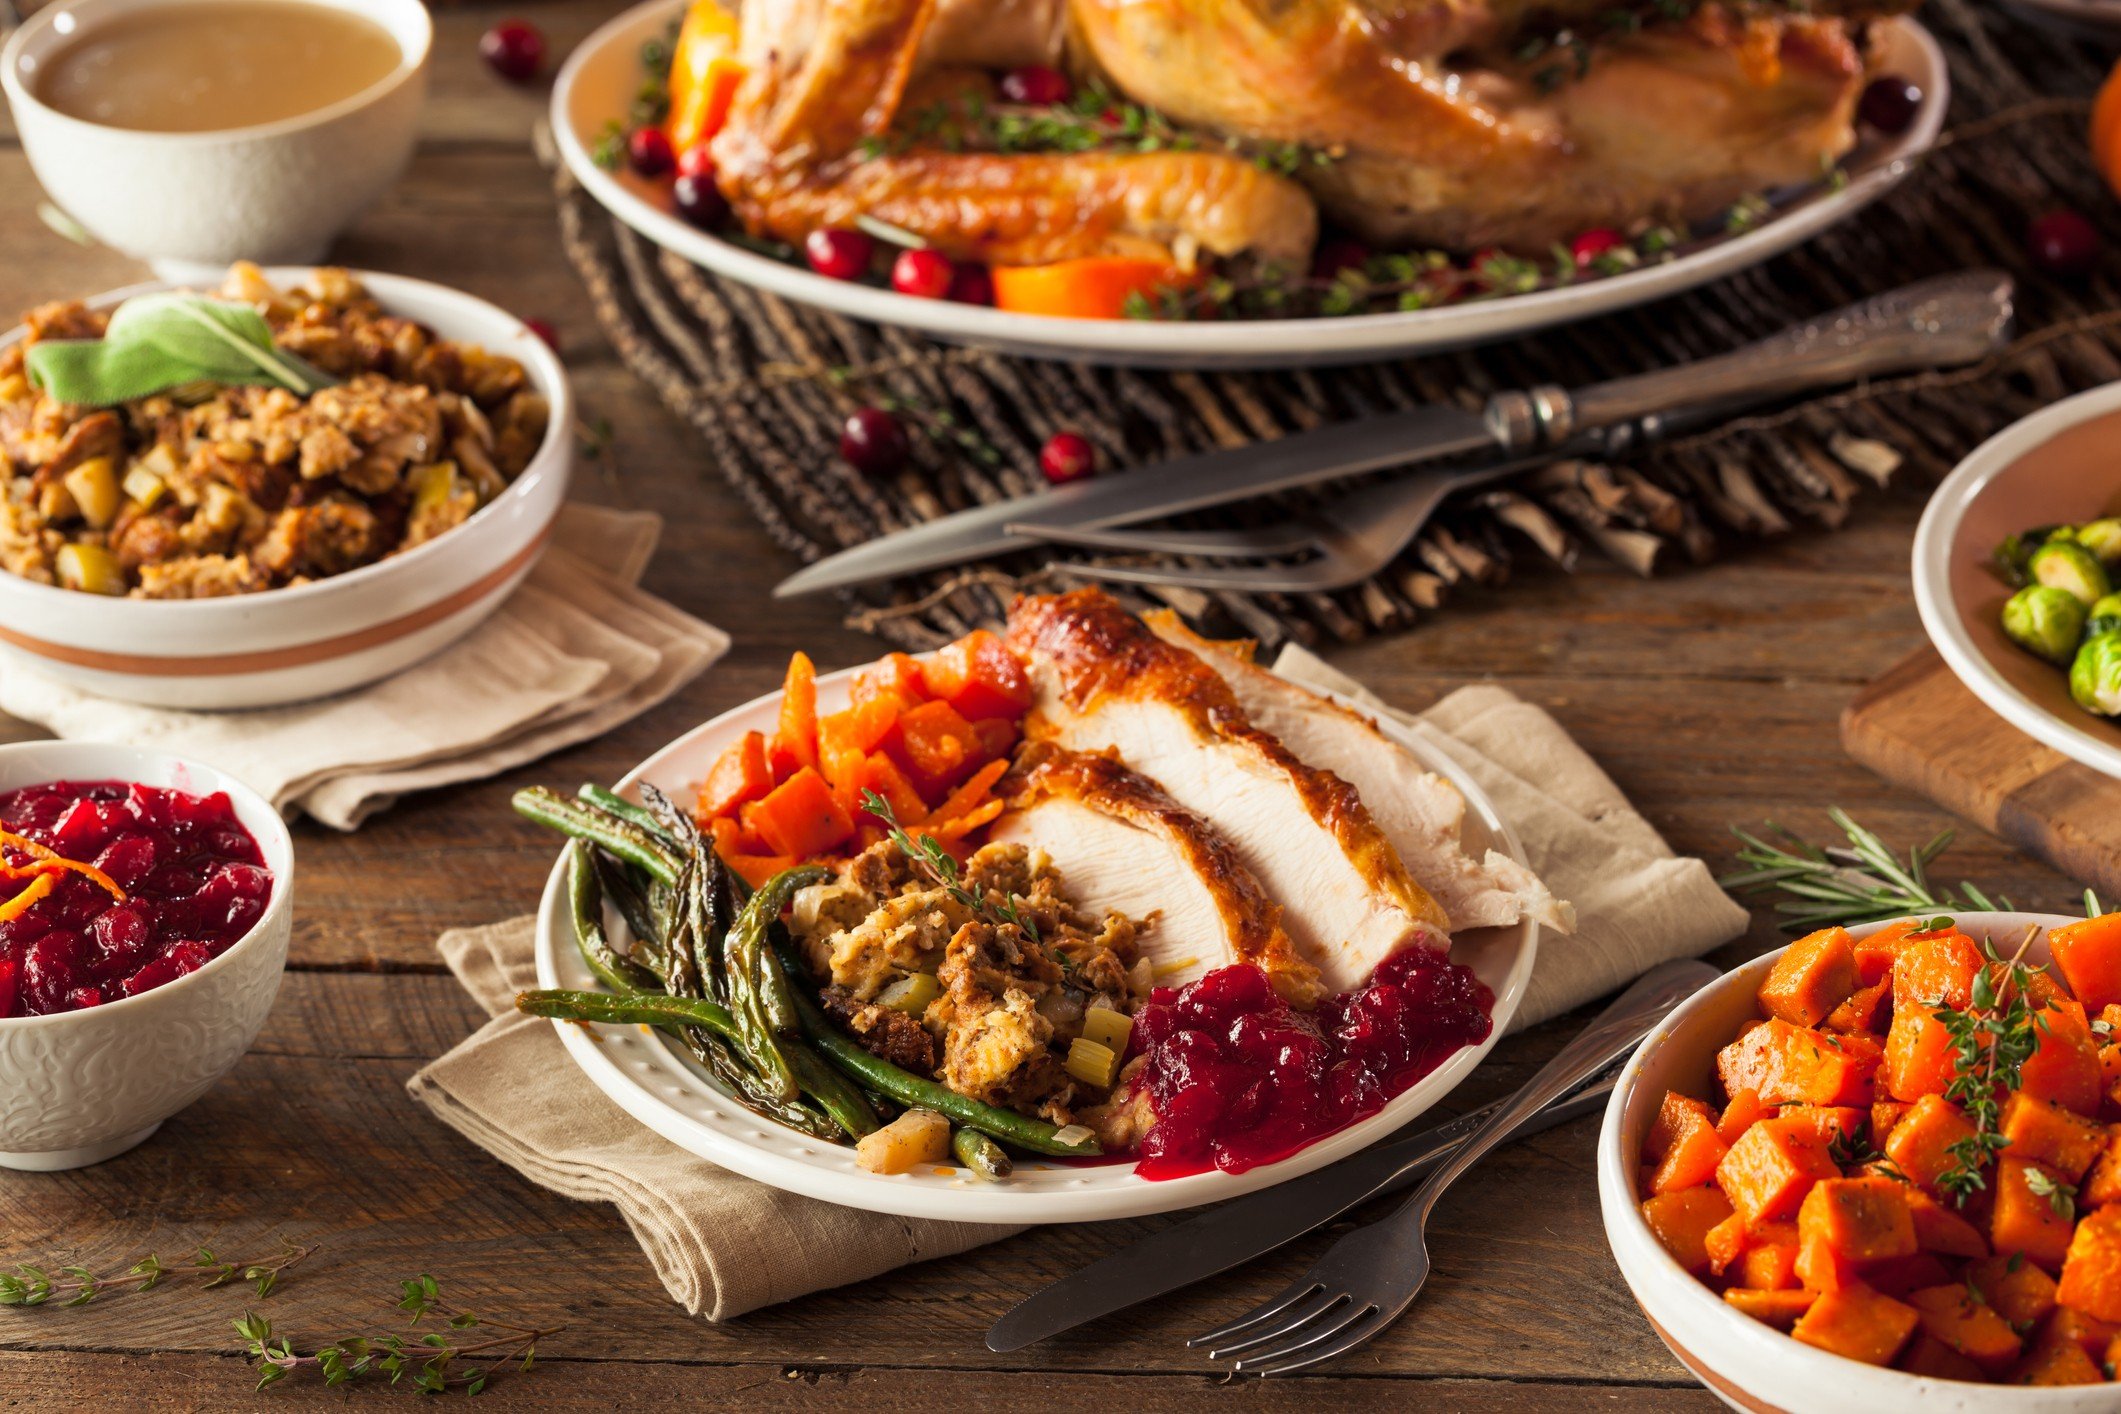 A traditional Thanksgiving dinner is full of delicious food – and also lots of calories – but there are ways to enjoy your favourite dishes without putting on weight.